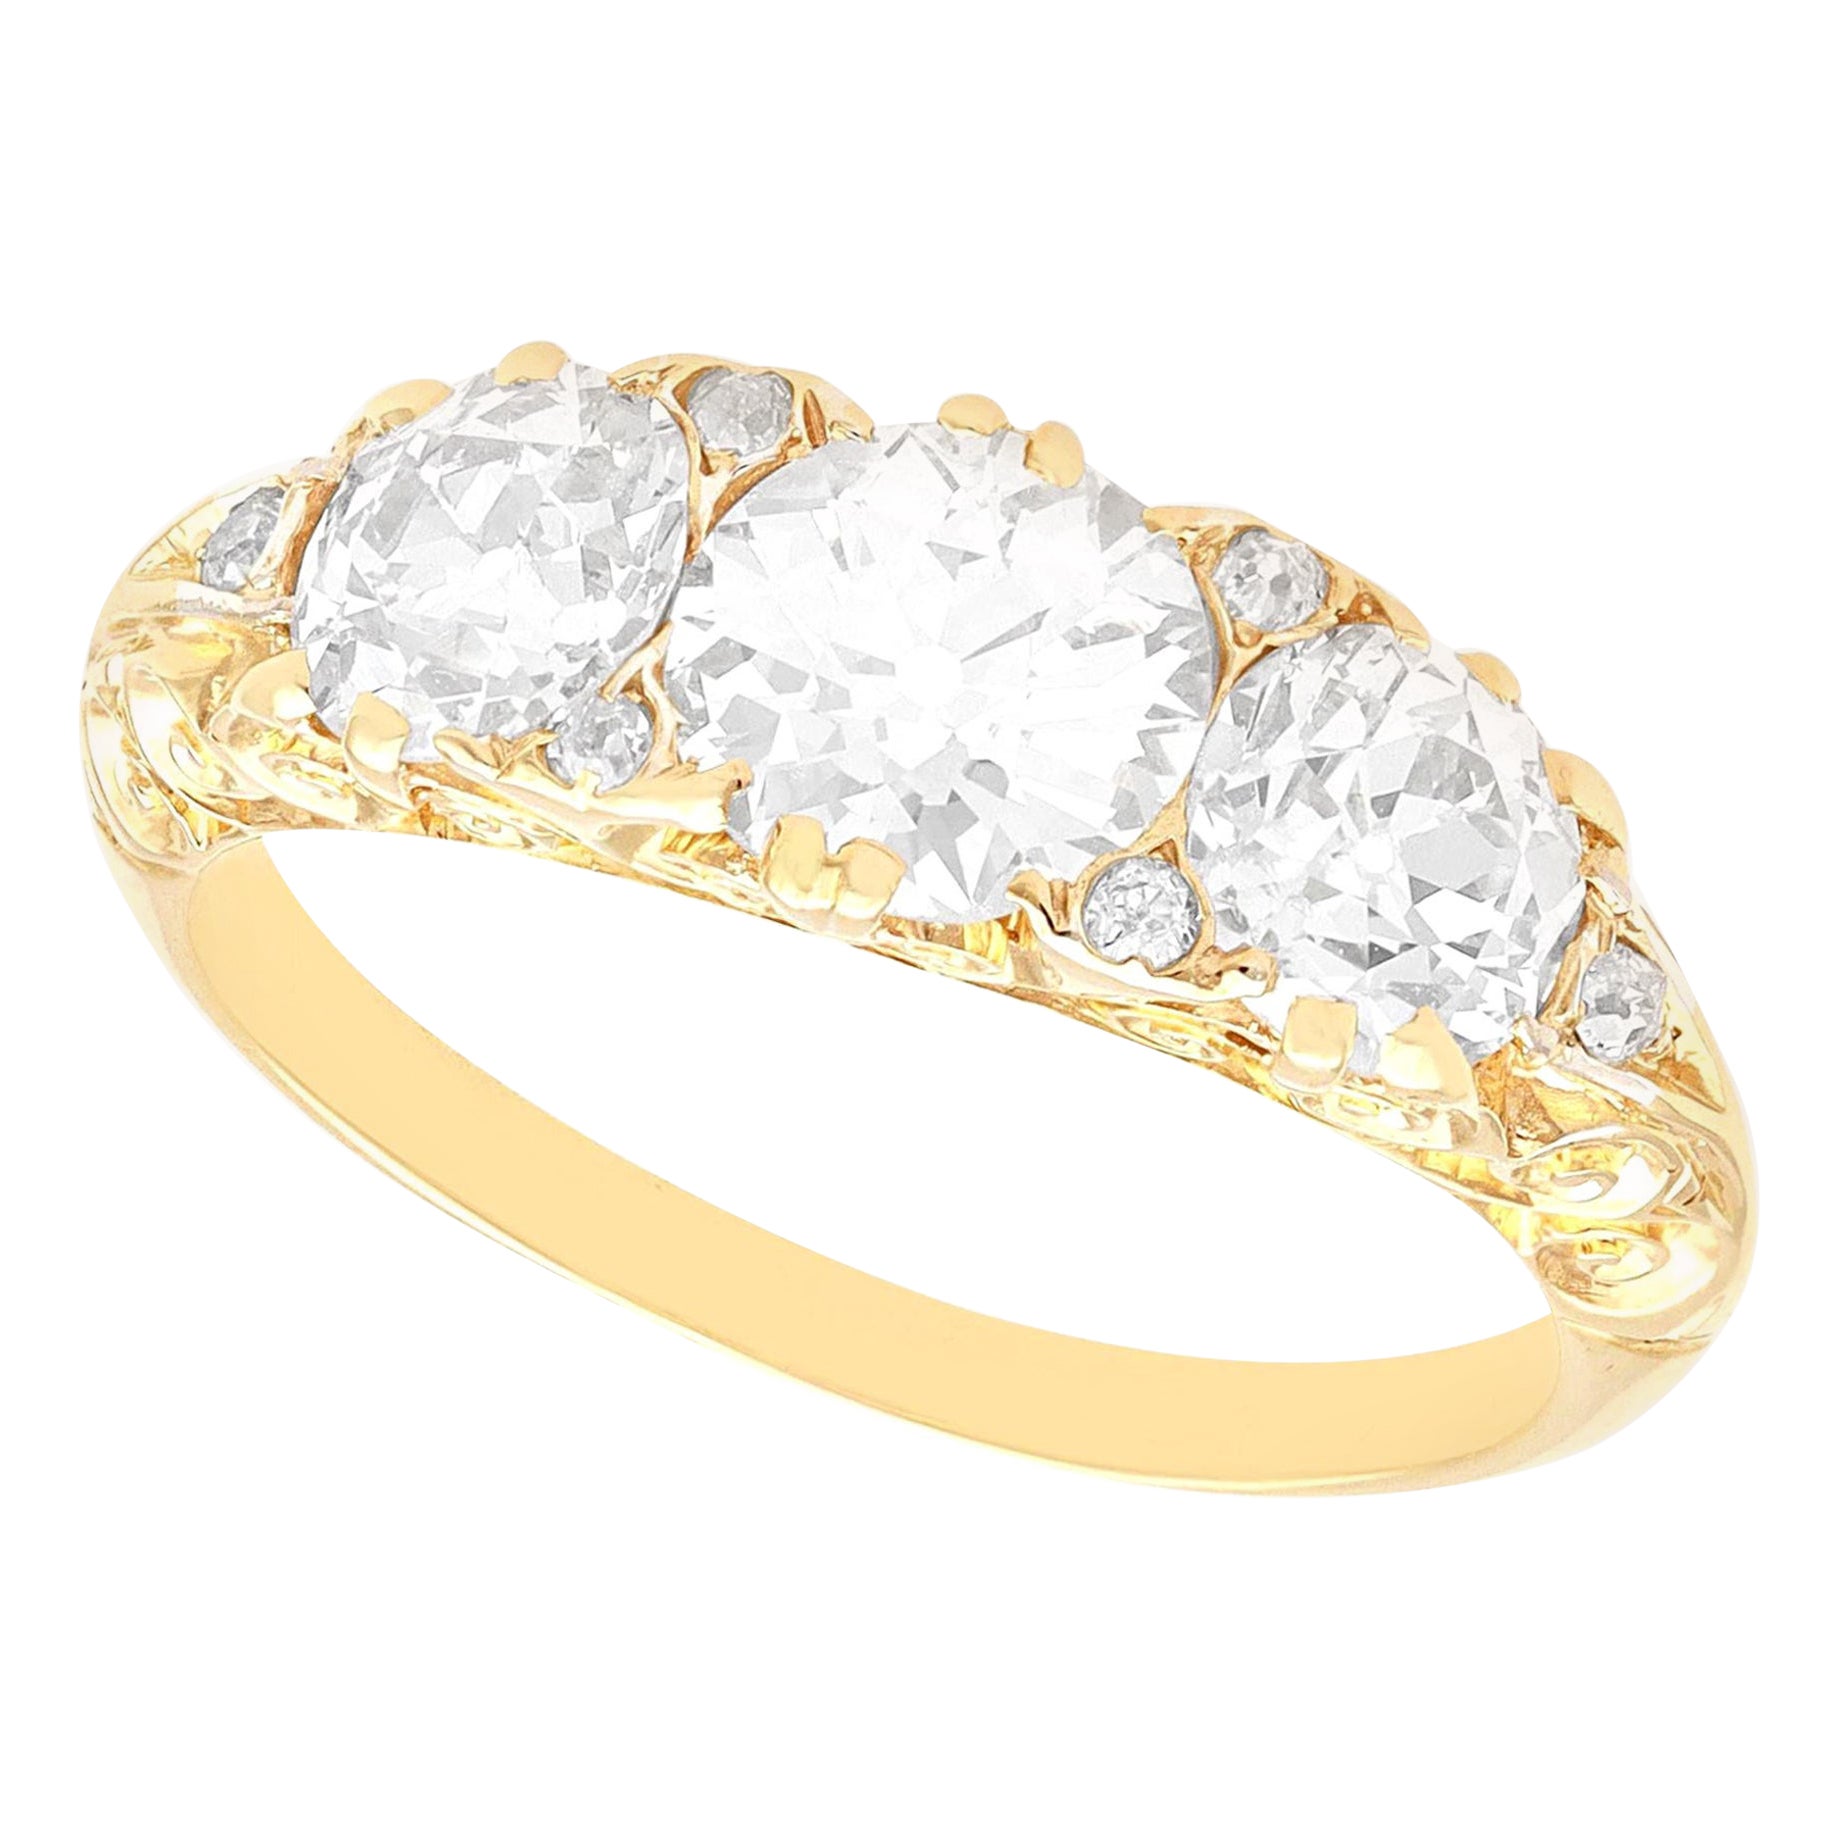 Antique 2.56 Carat Diamond and Yellow Gold Trilogy Ring